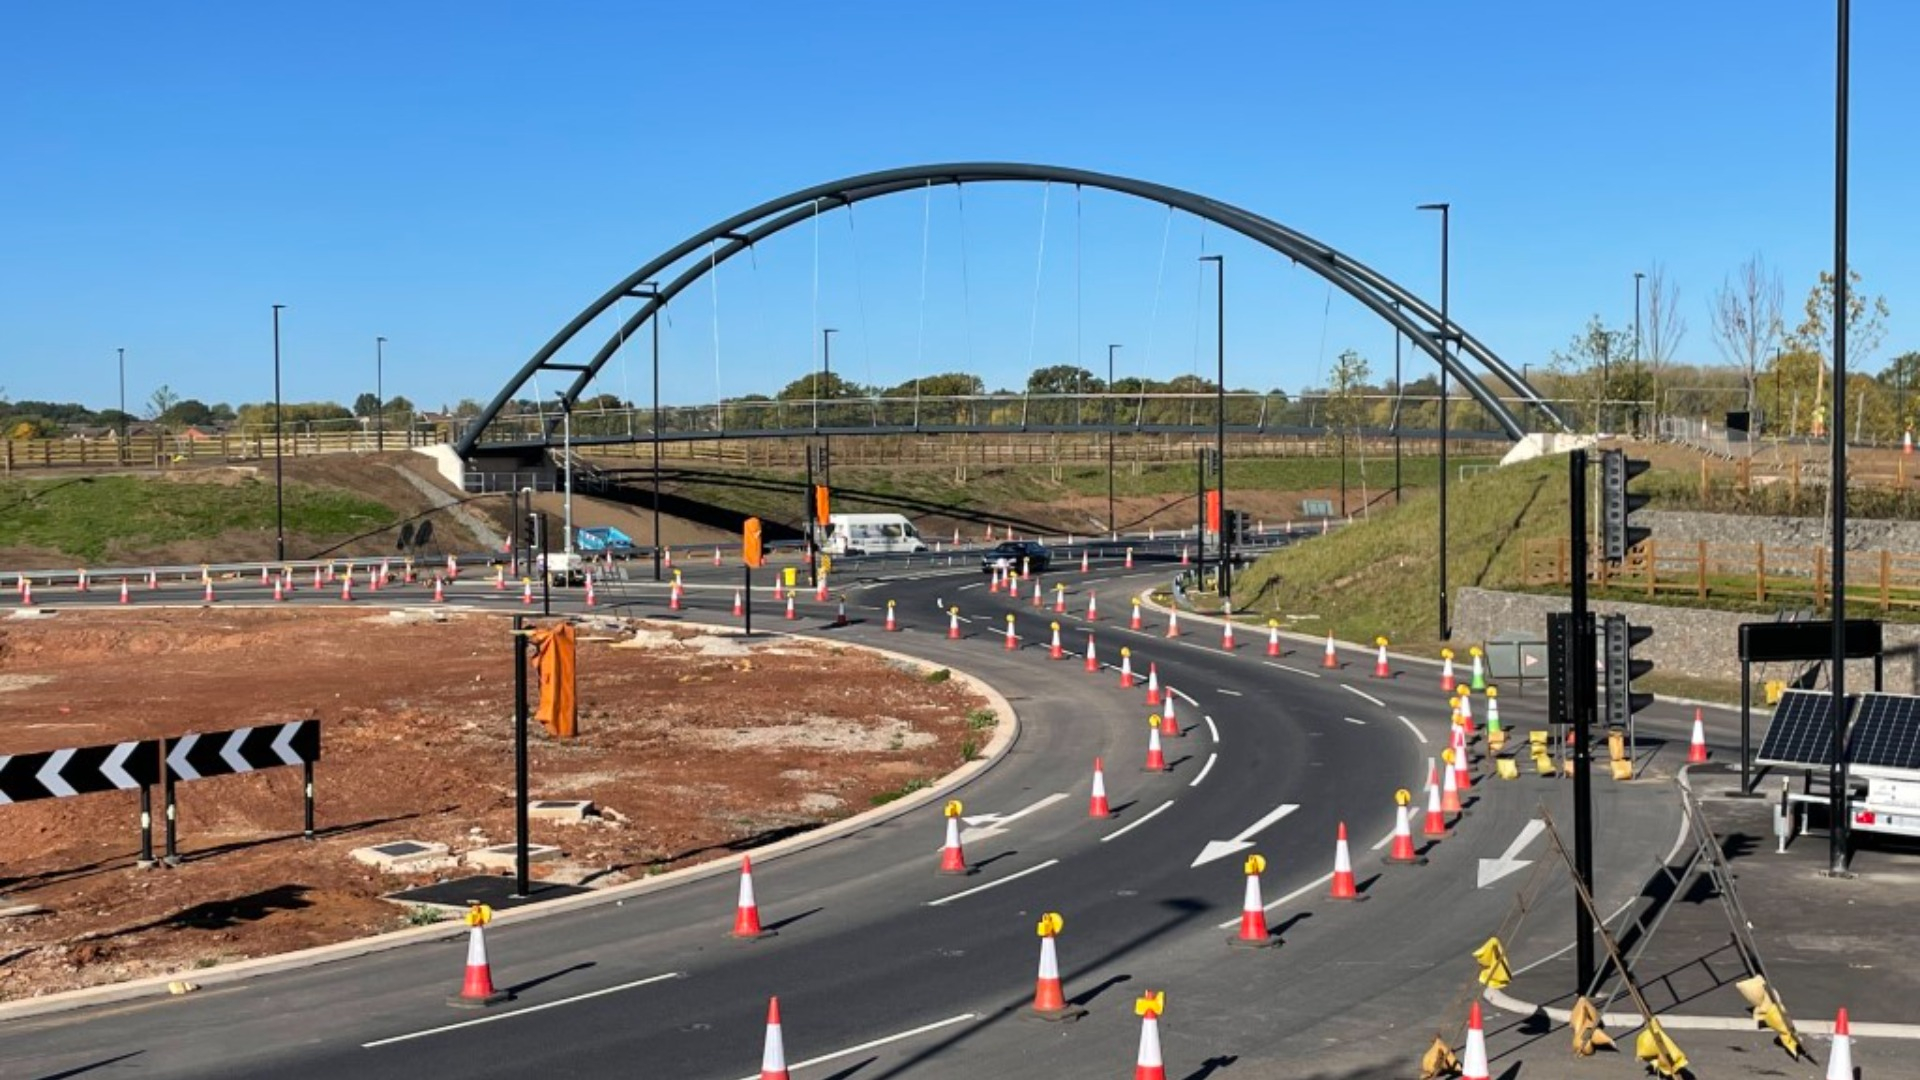 Large roundabout under construction with a bridge going over one of the exit roads.